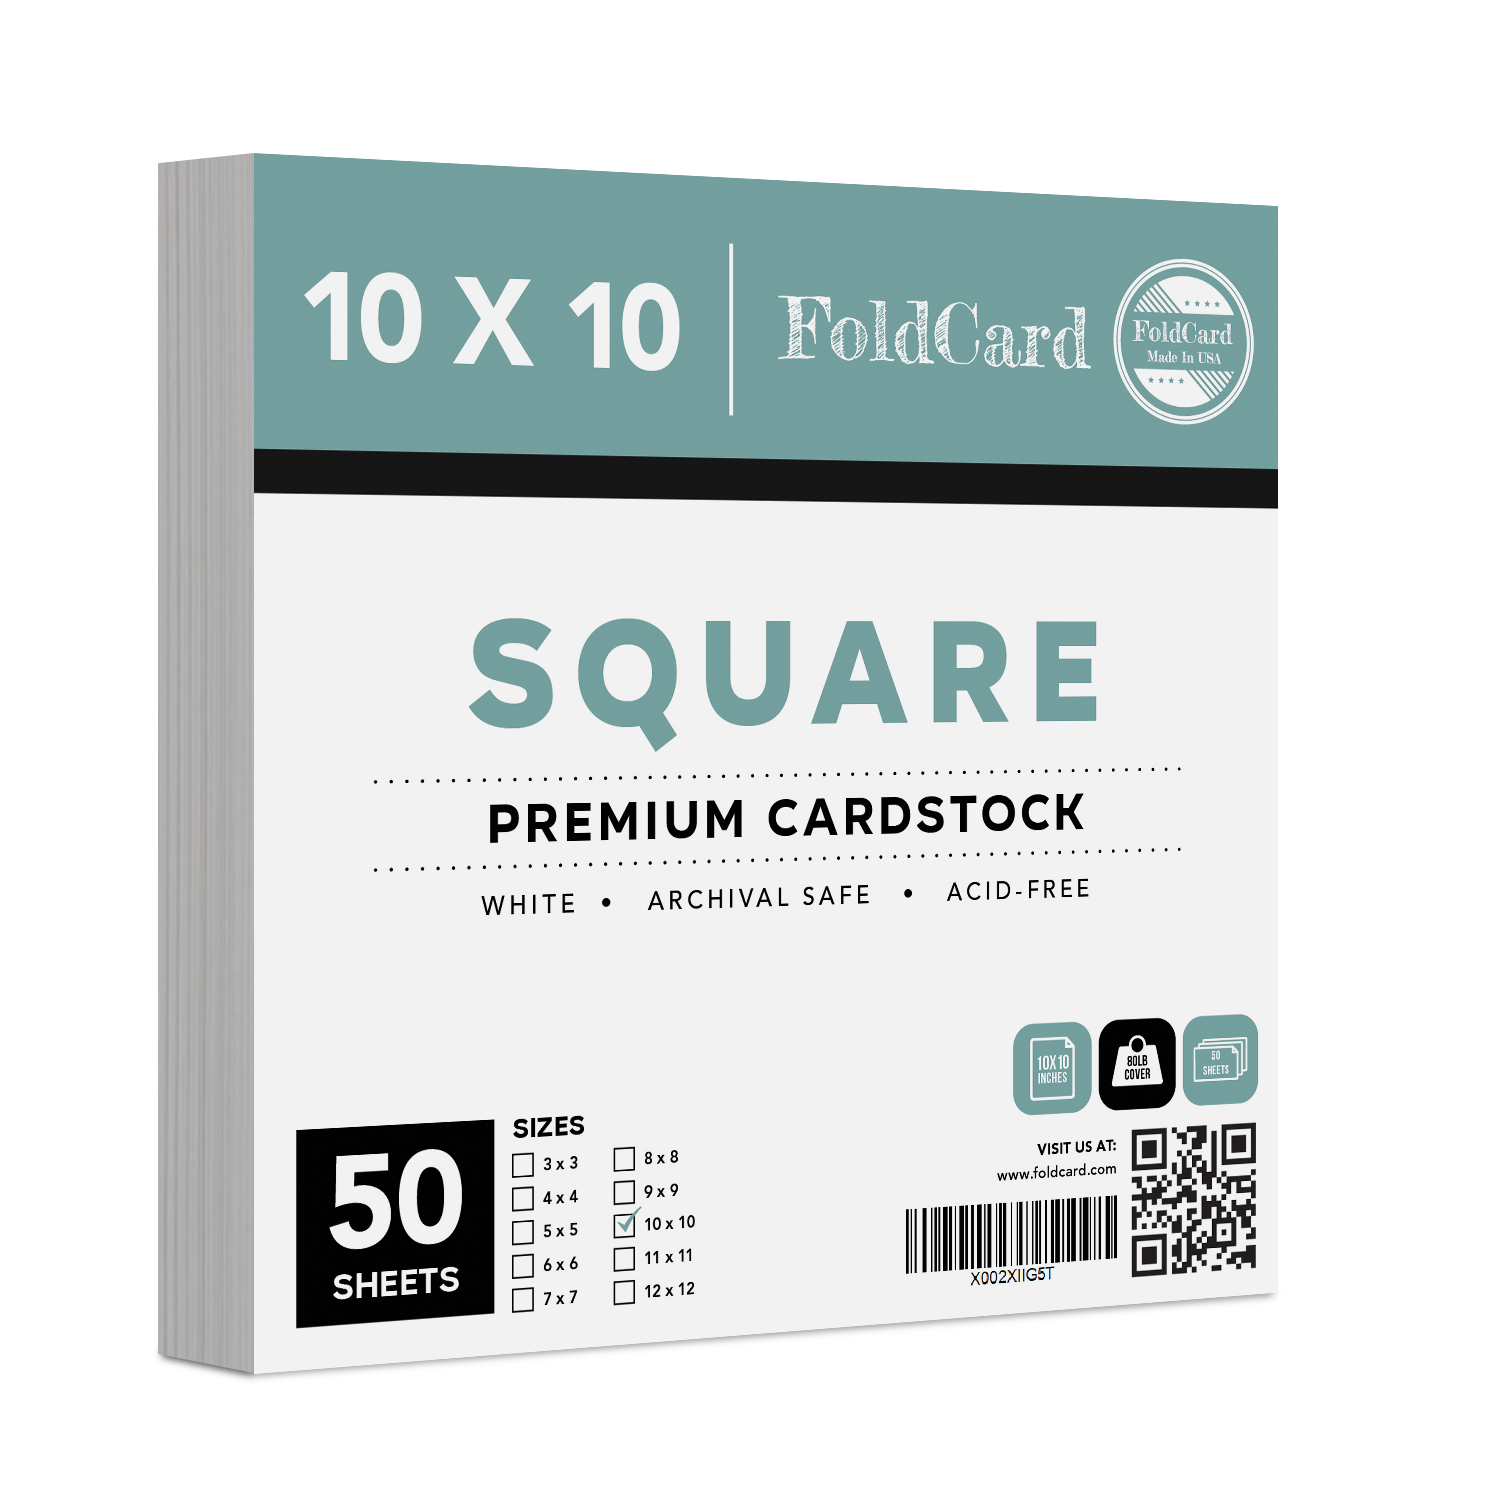 Premium 10x10 Square Cardstock for Crafts and Printing